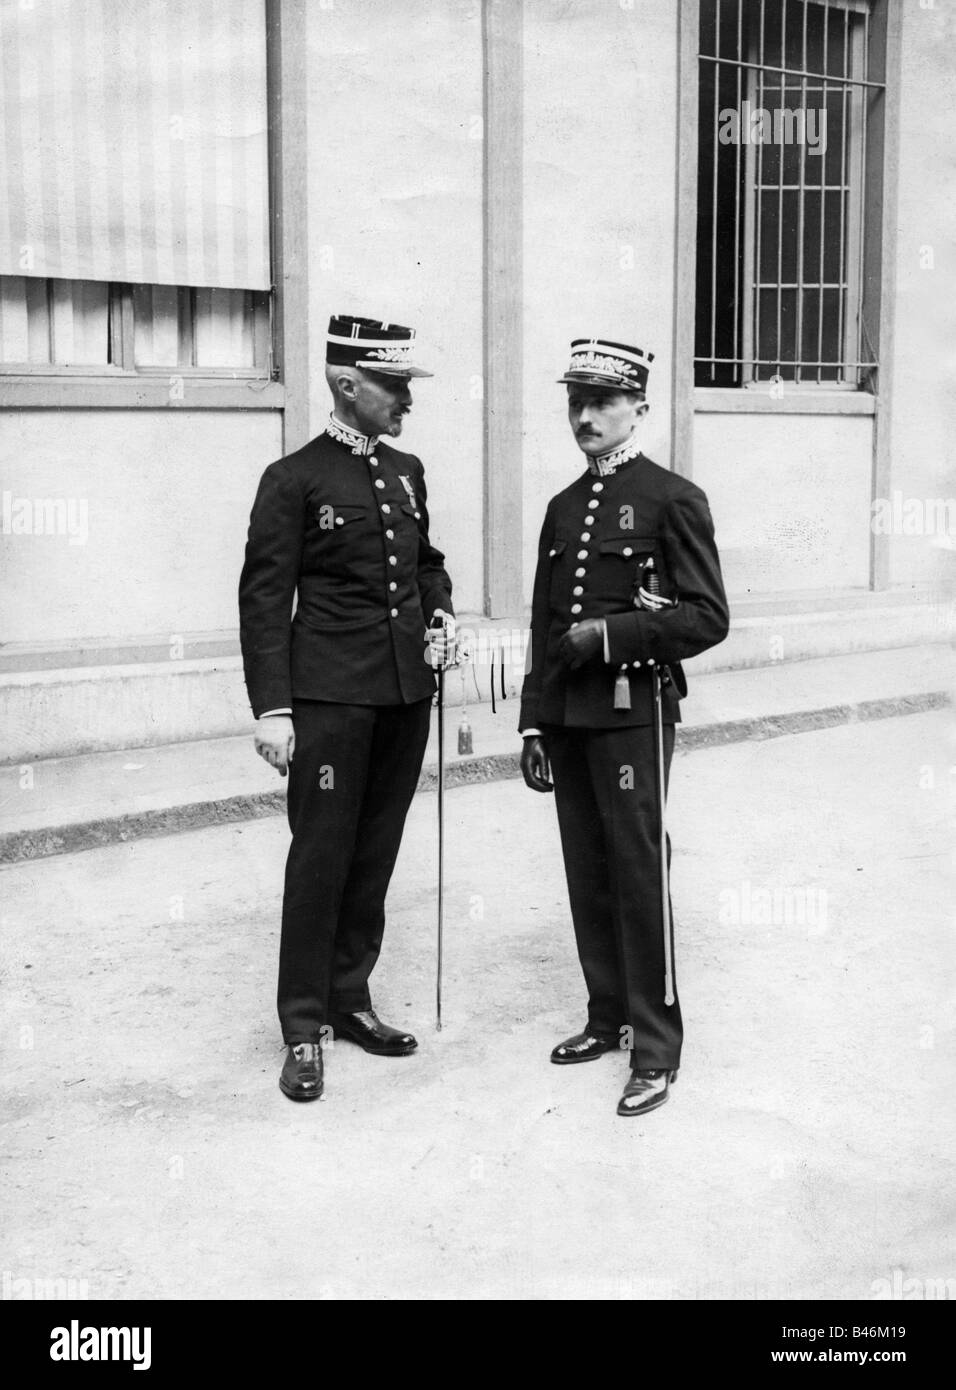 police, France, two French police officers, full length, early 20th century, historic, historical, officer, uniform, uniforms, sword, saber, kepi, kepis, cap, caps, people, 1900s, 1910s, Stock Photo